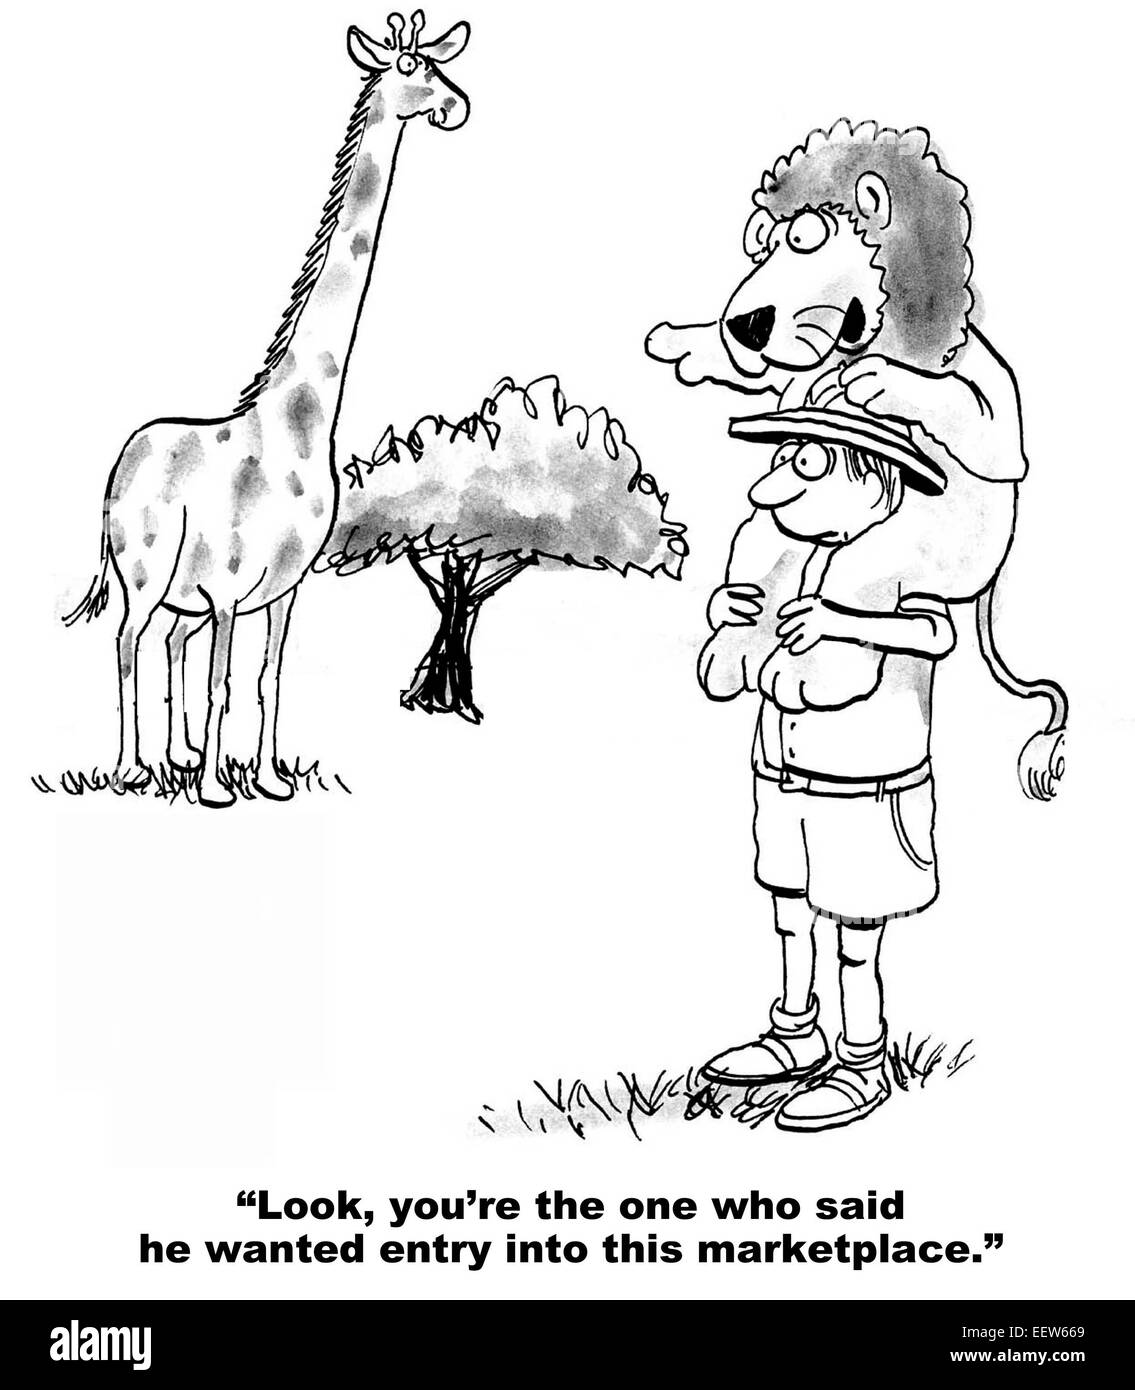 Cartoon of lion on man's shoulders saying the man allowed the competitor, giraffe, into the marketplace. Stock Photo